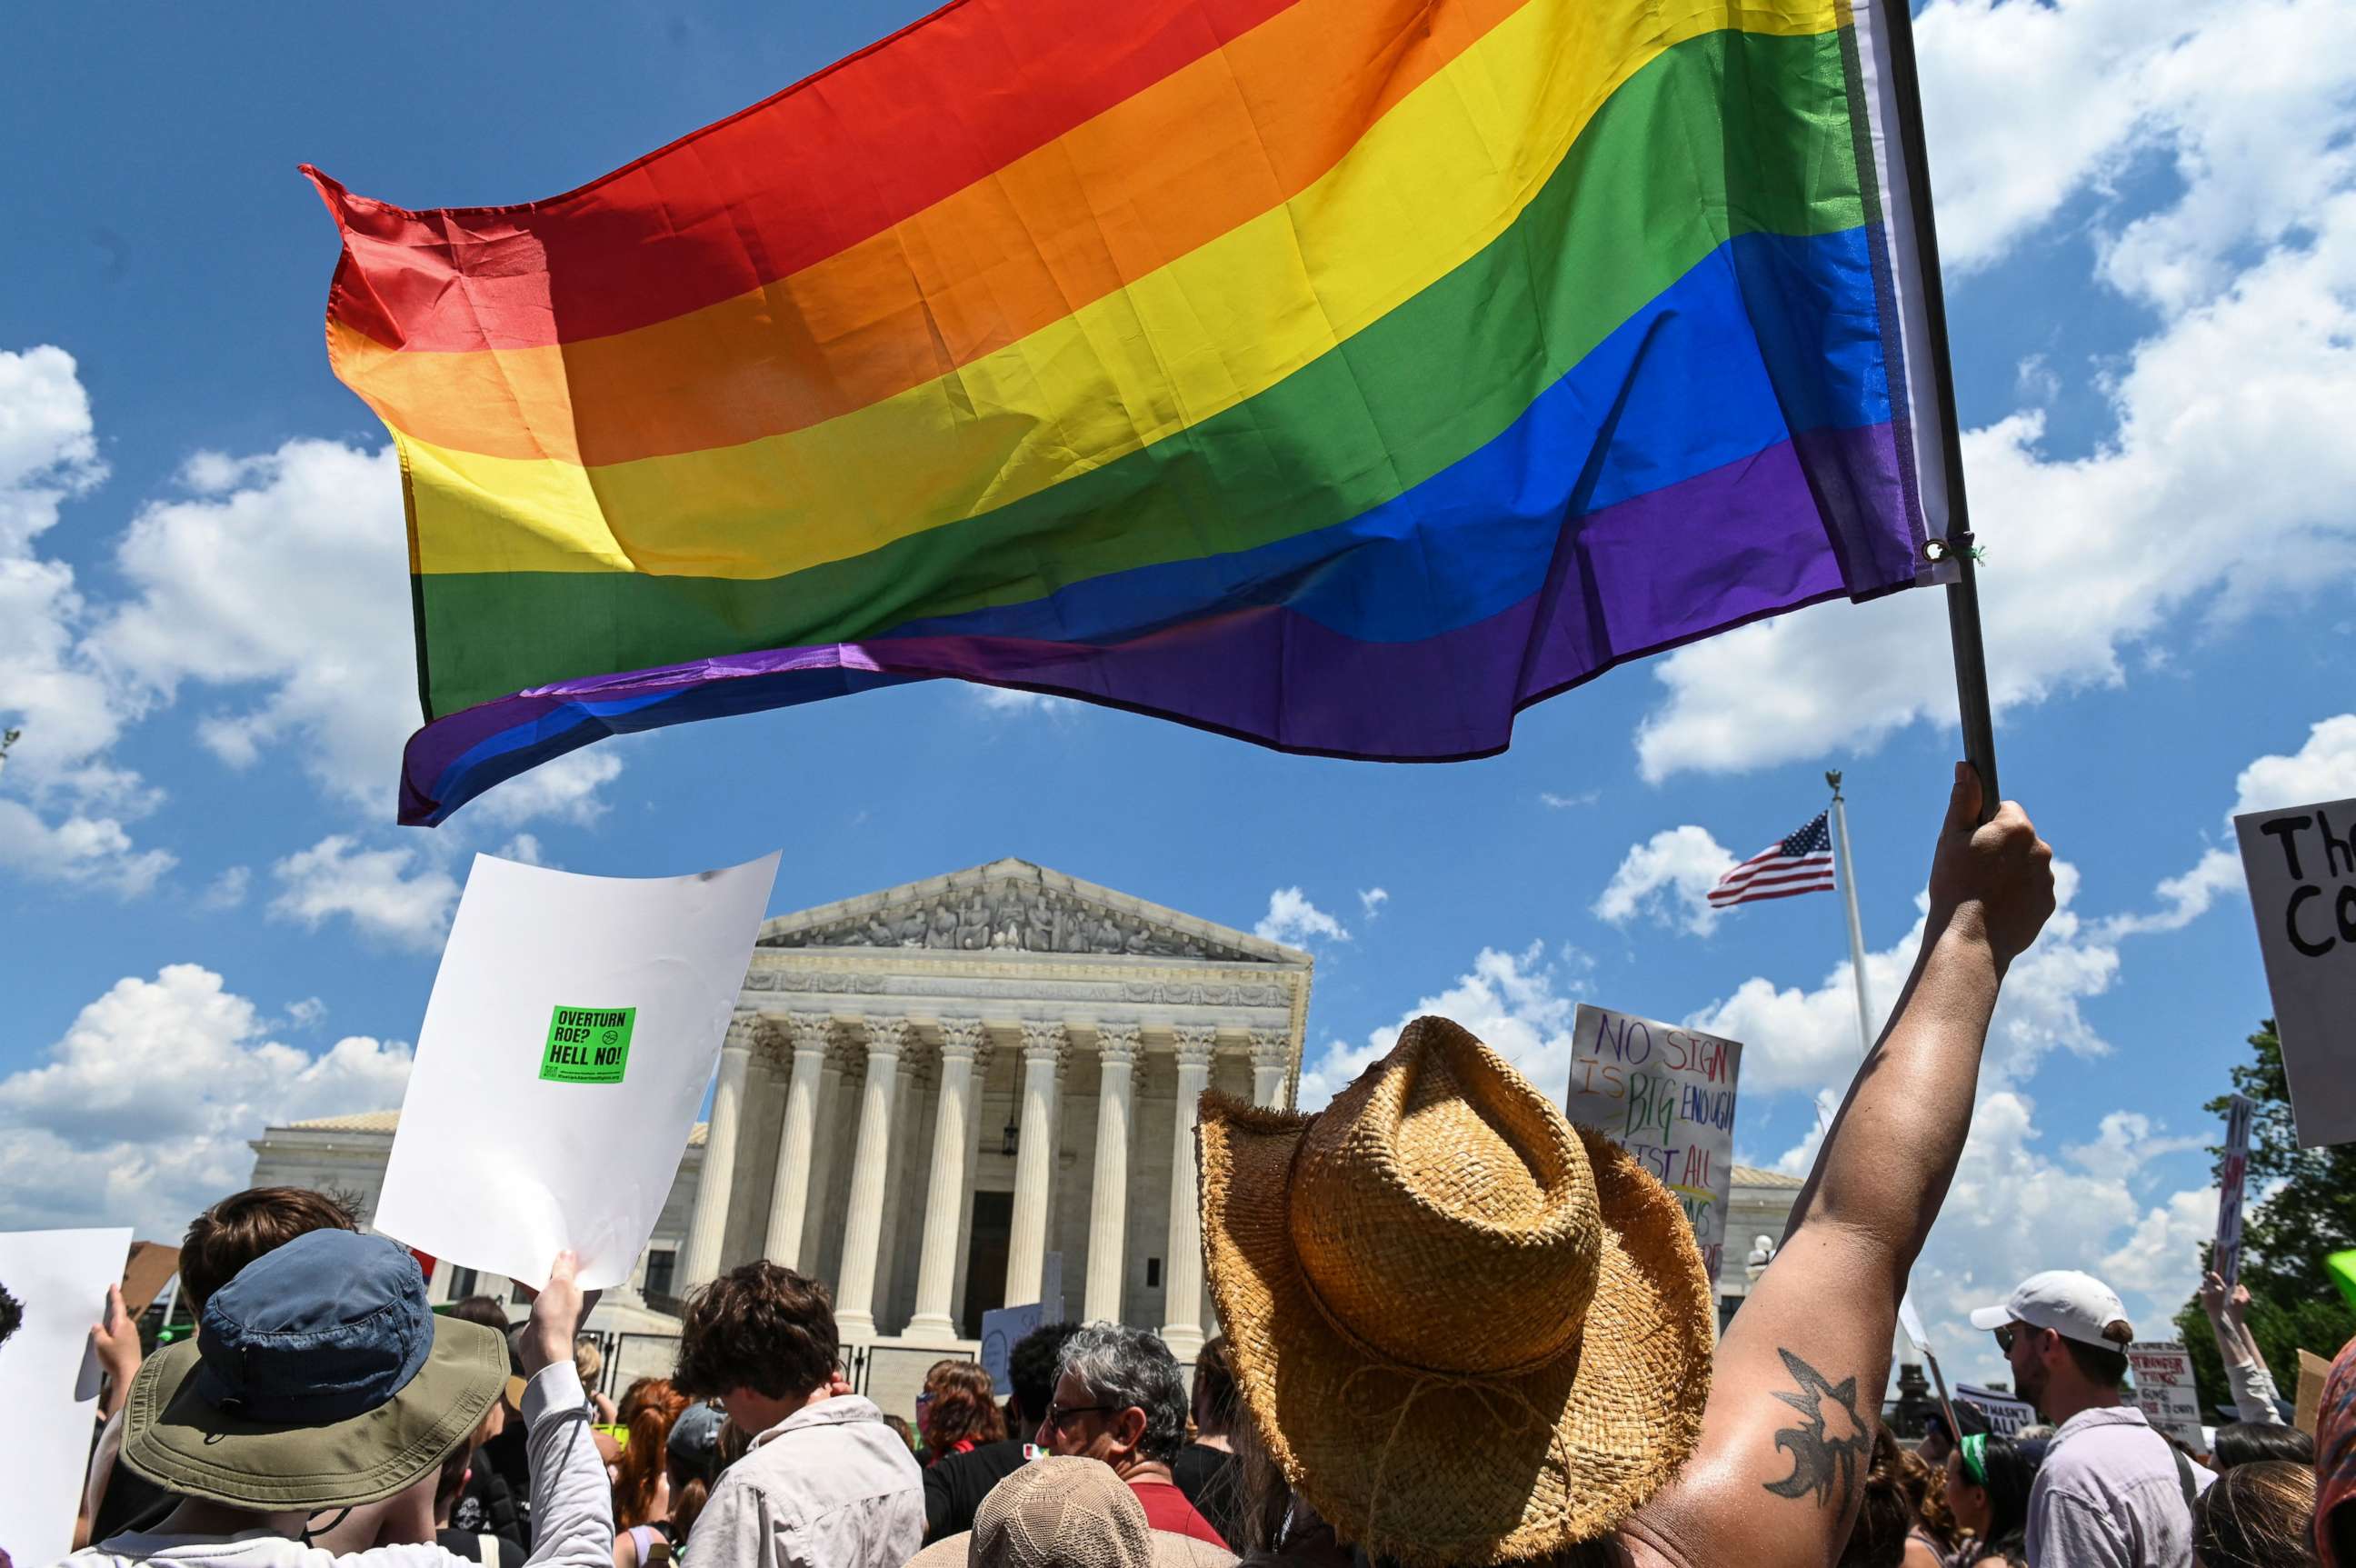 PHOTO: An abortion rights demonstrator waves a Pride flag during a rally in front of the US Supreme Court in Washington, DC, on June 25, 2022.